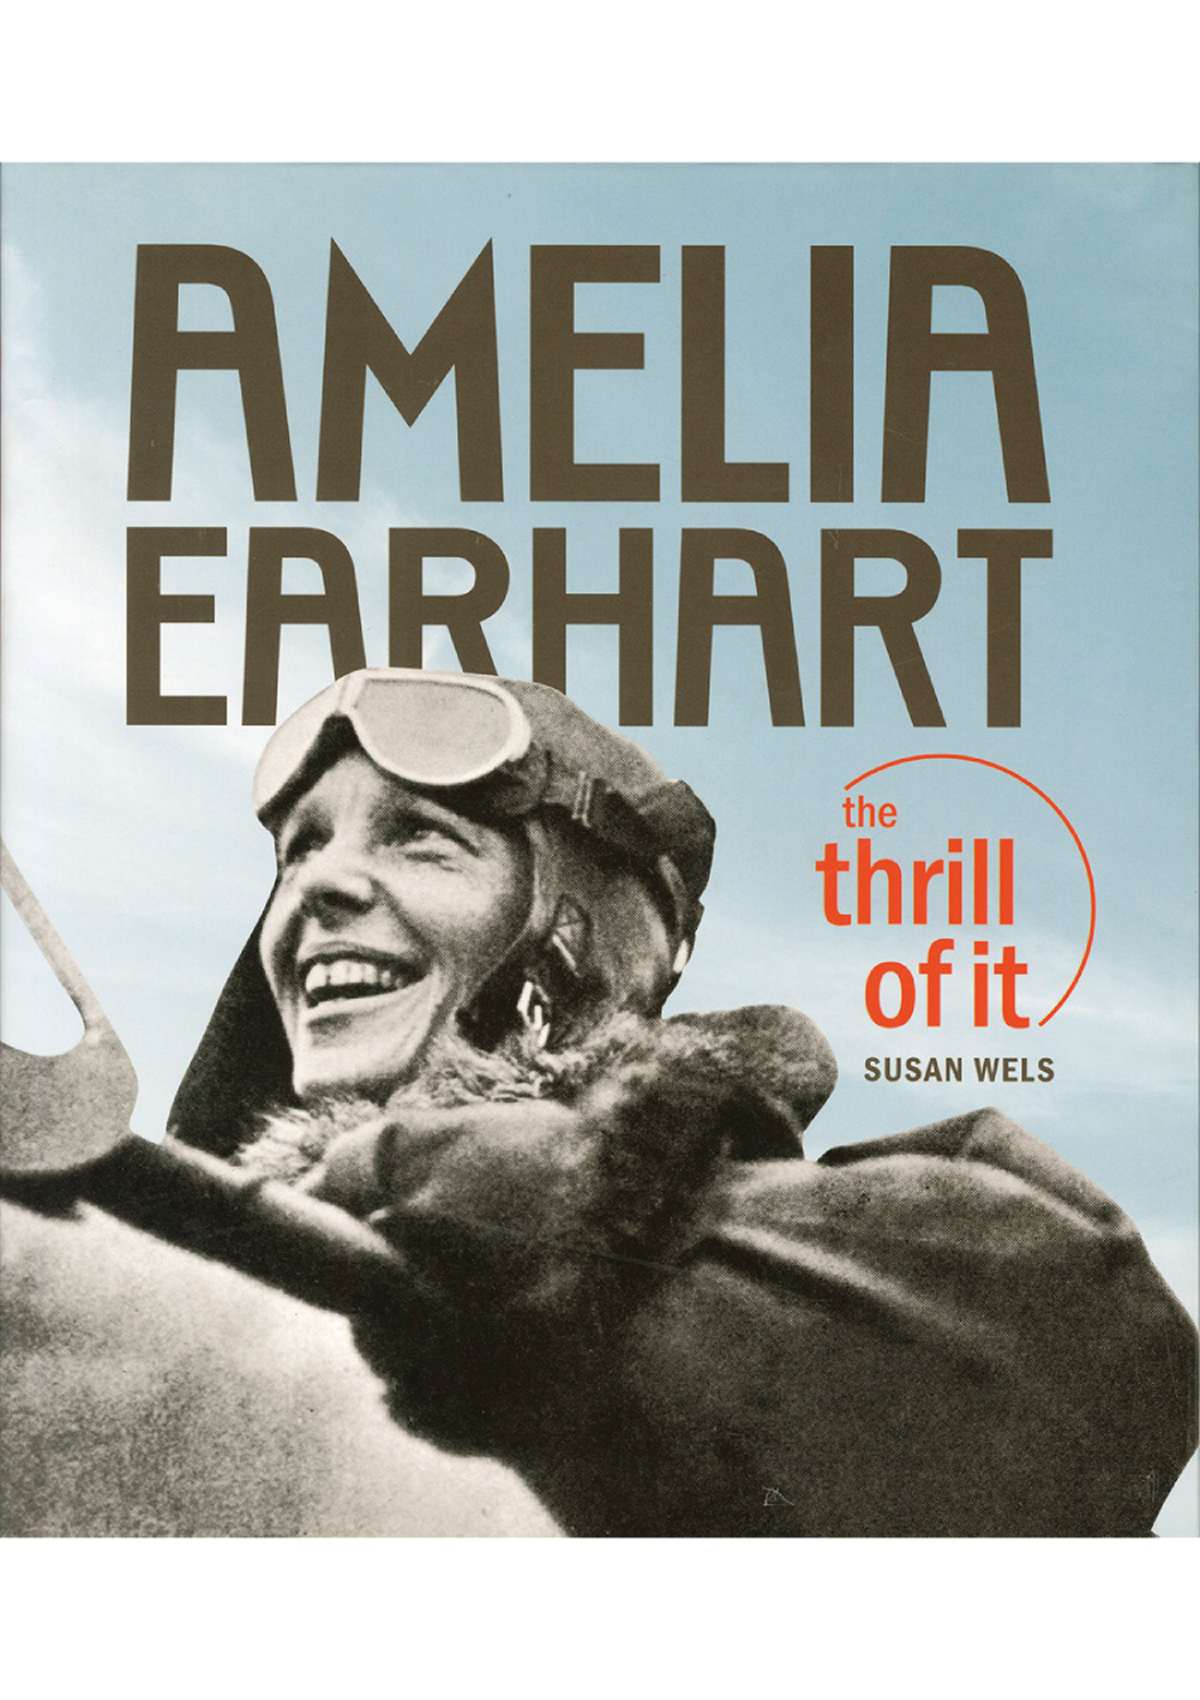 7634 - Amelia Earhart: The Thrill of it